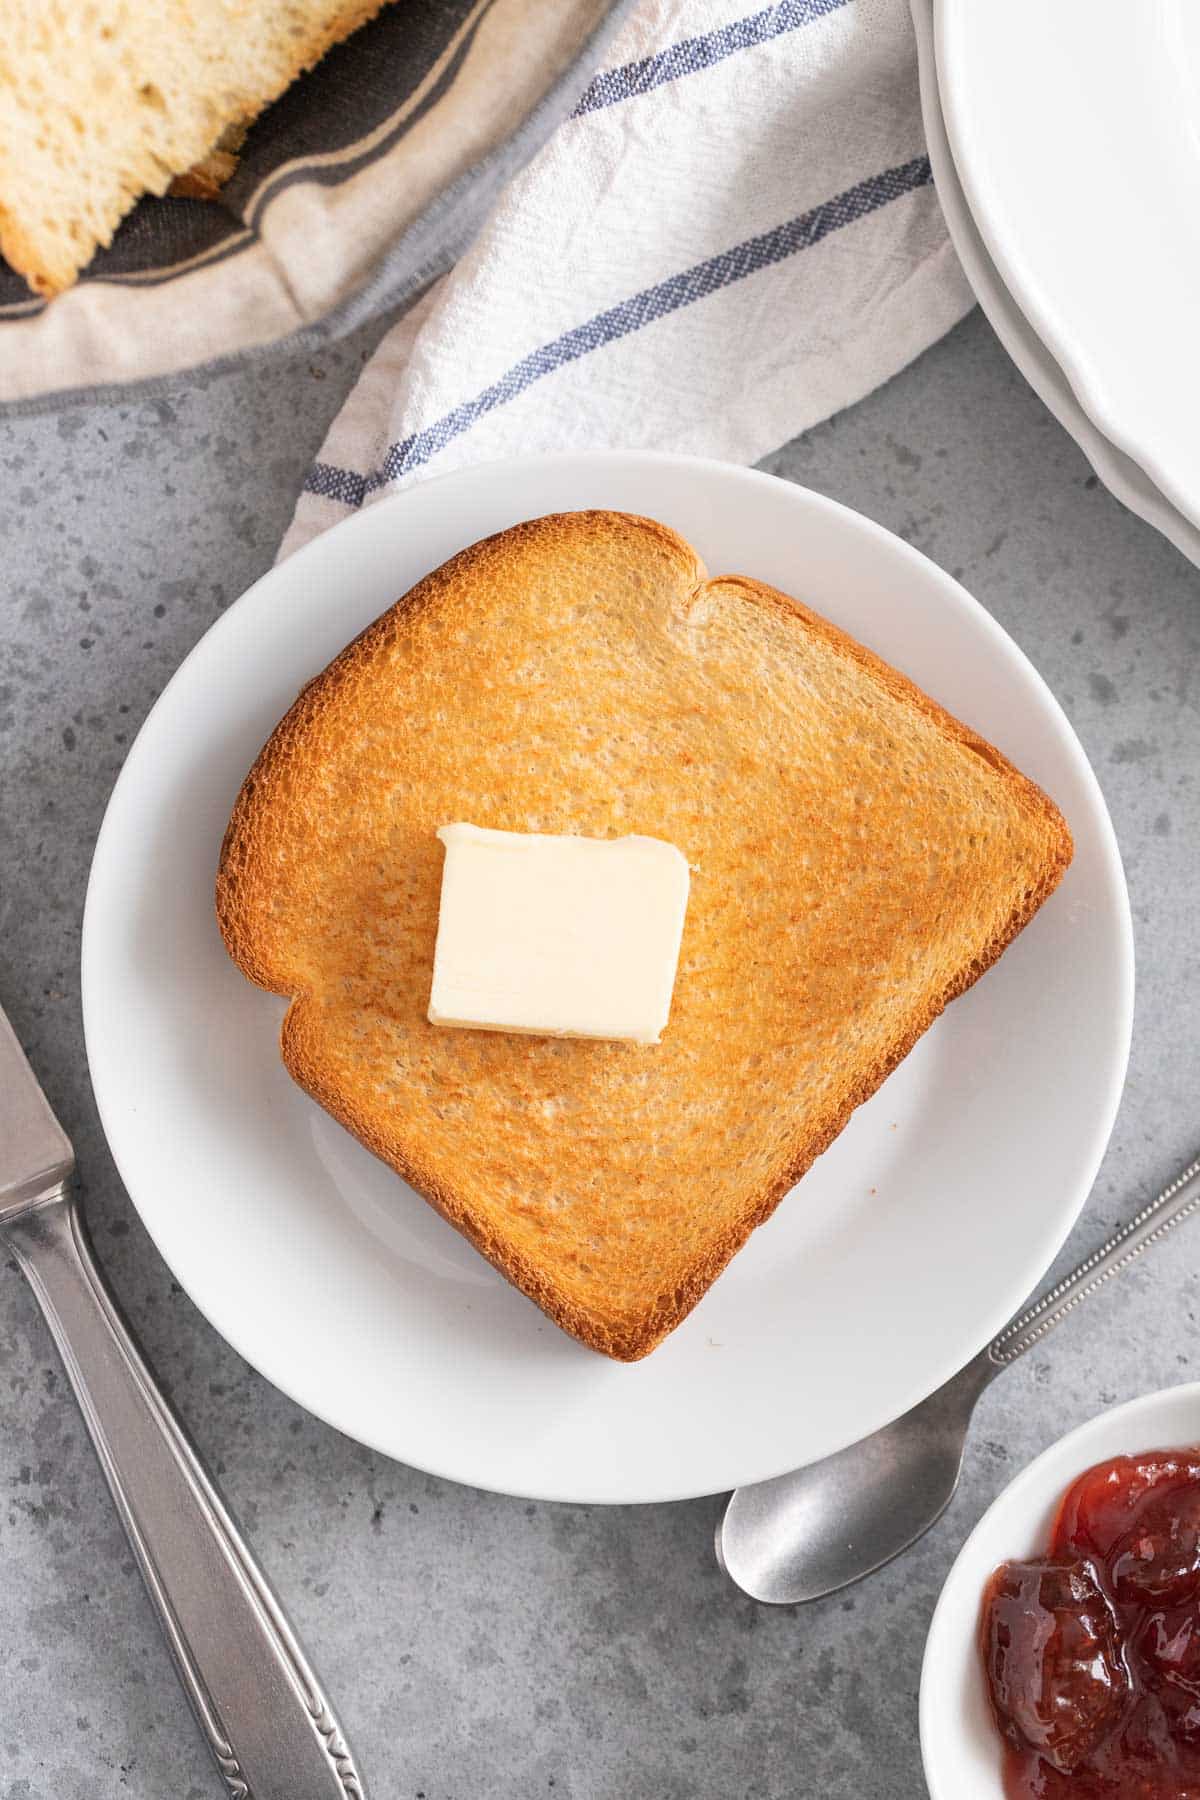 A slice of toast on a plate with a piece of butter on it and a knife next to it.